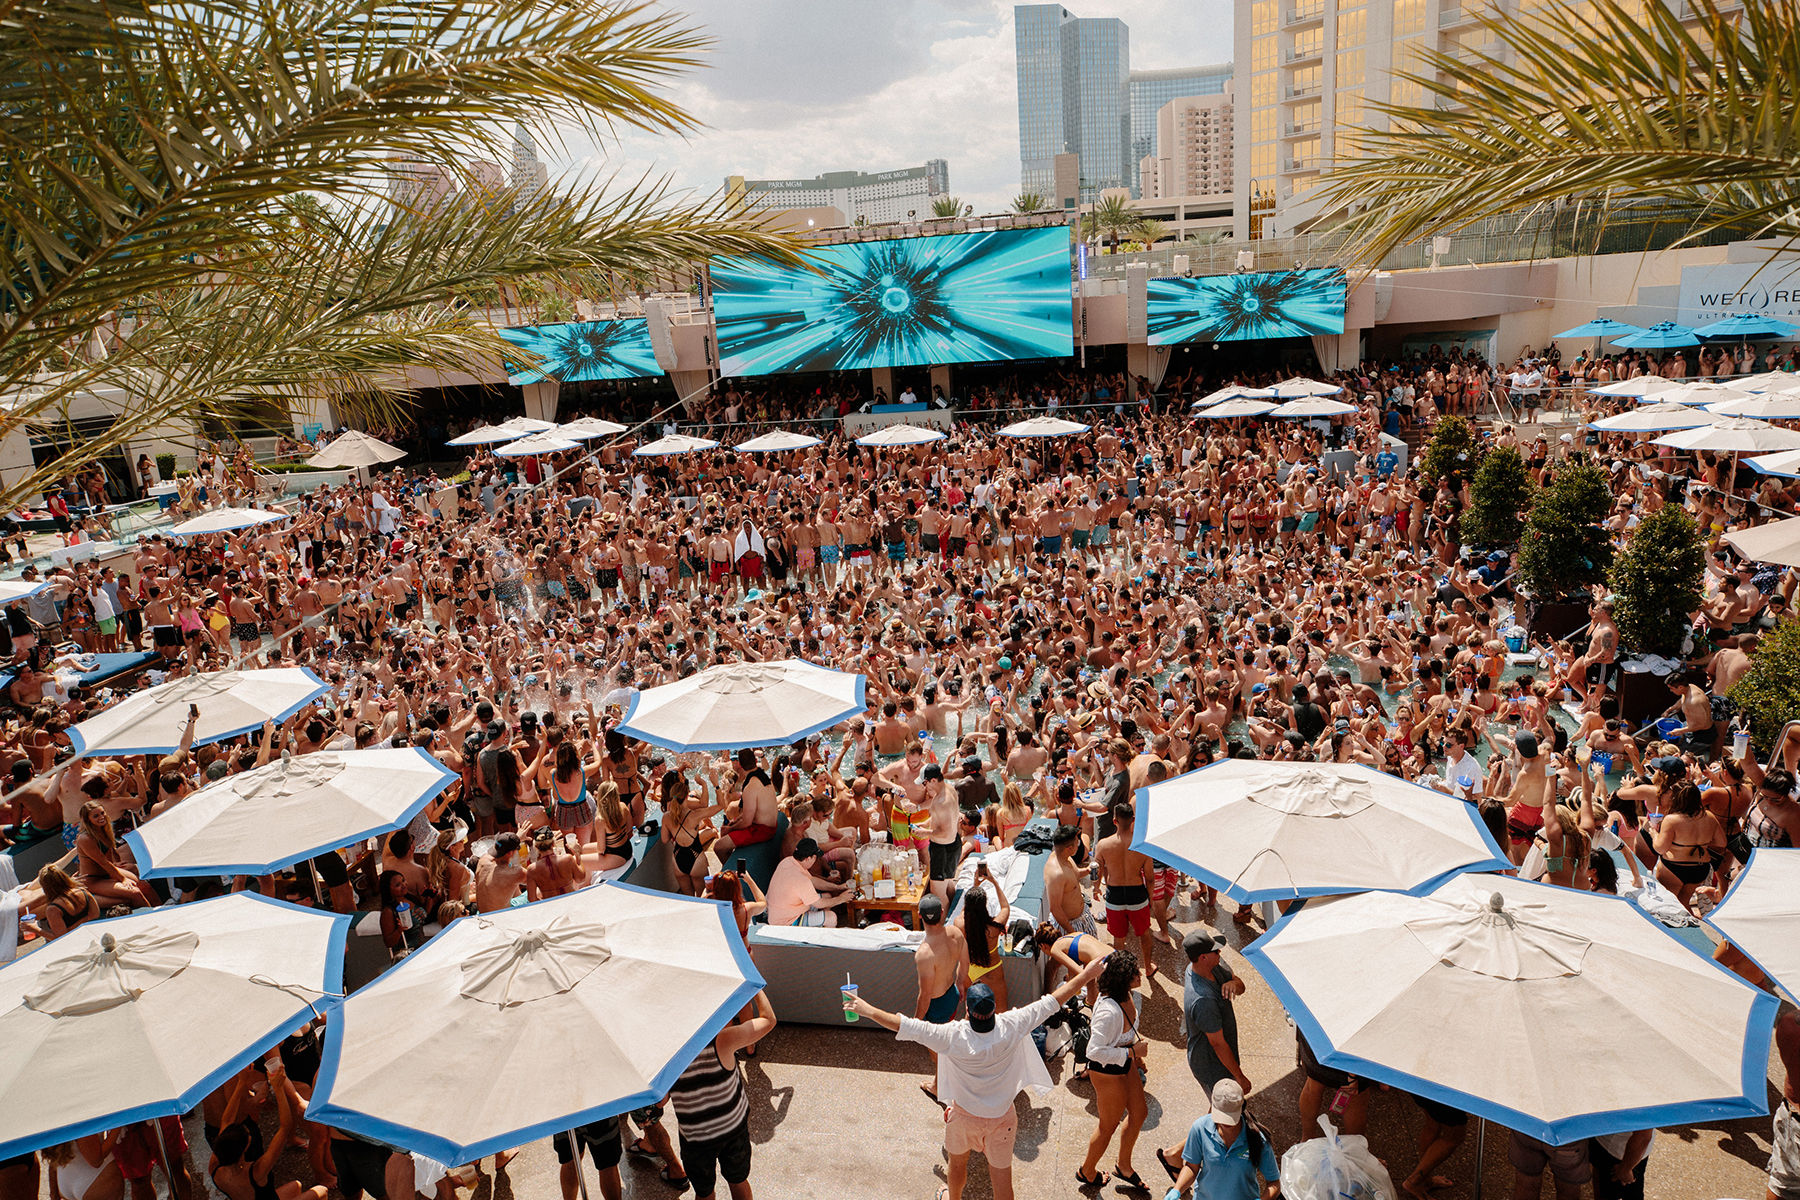 Las Vegas Pool Party. Wet republic Ultra Pool at MGM Grand Hotel and Casino in Las Vegas.